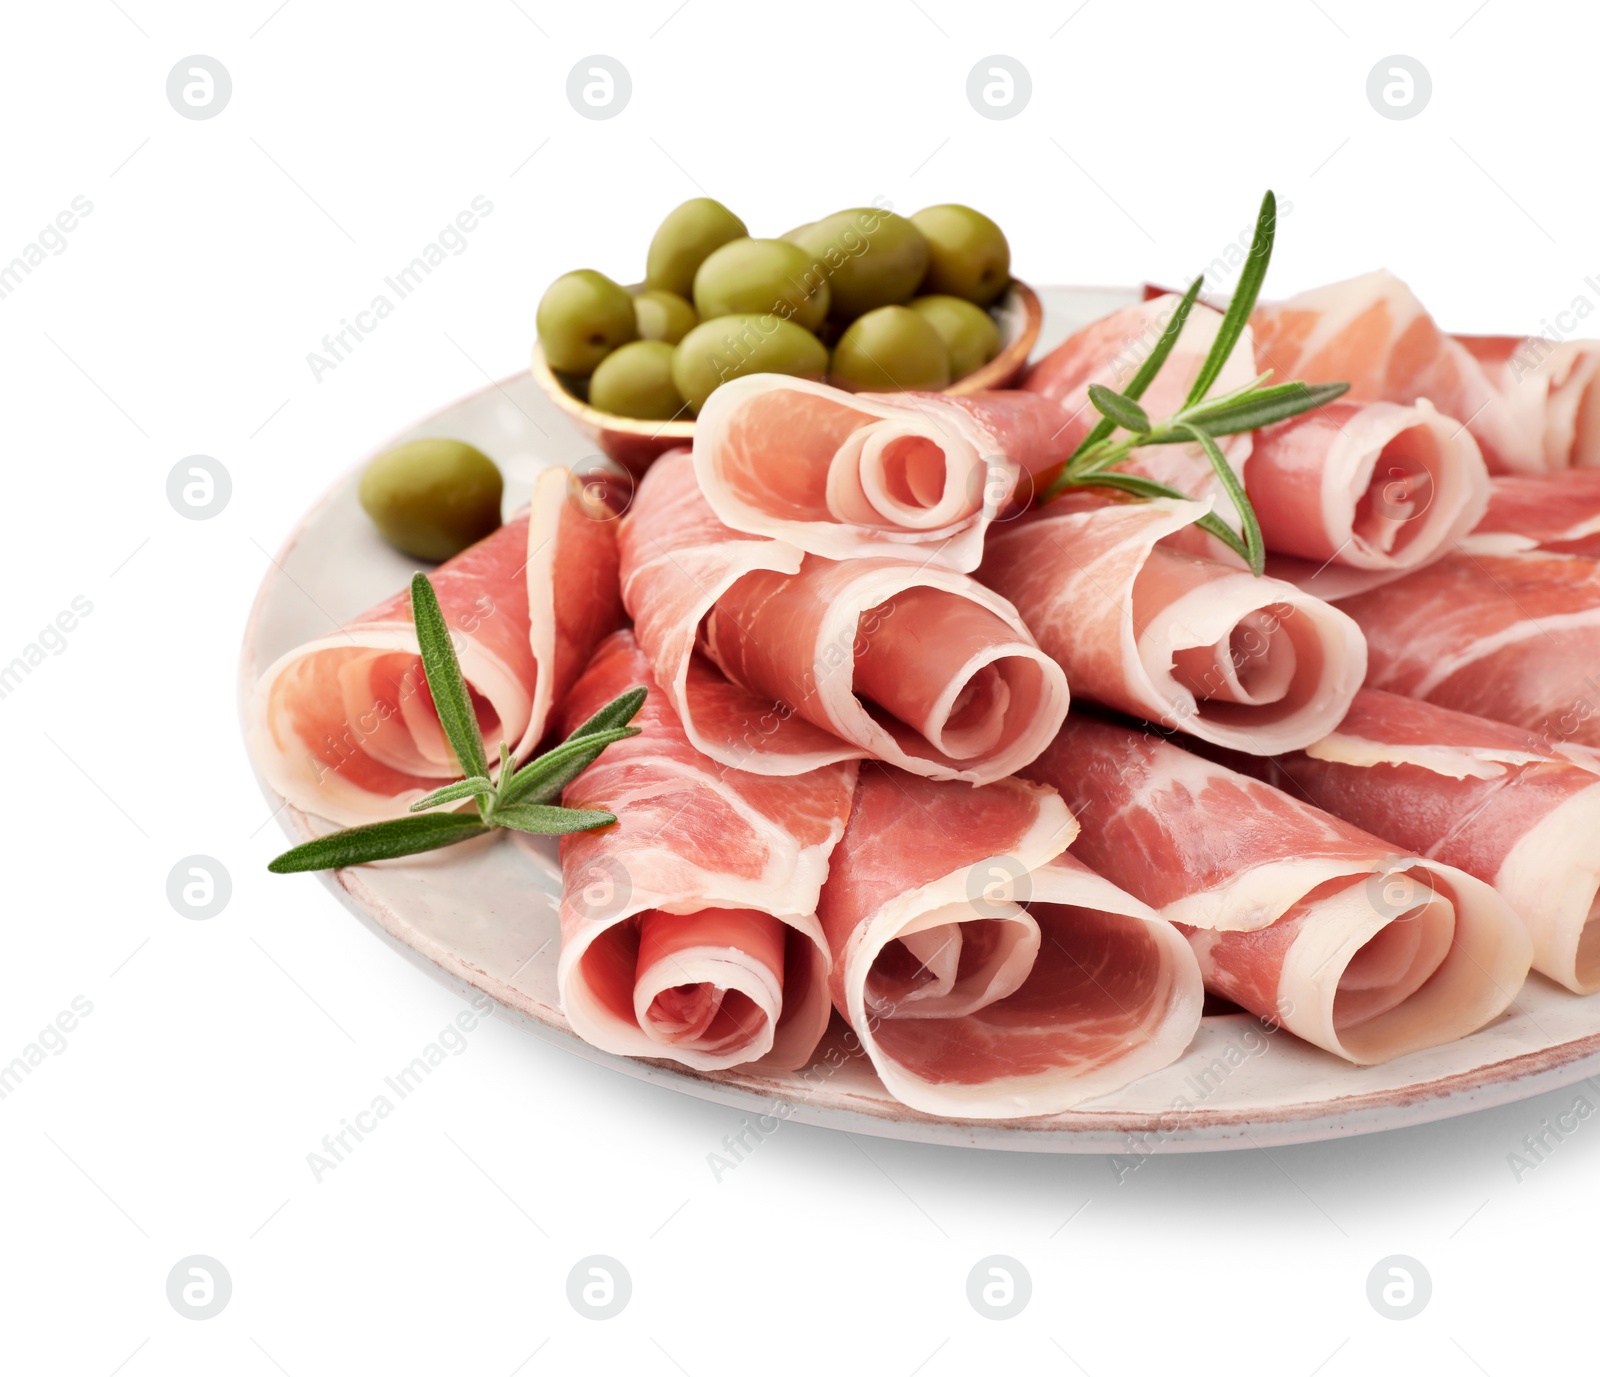 Photo of Plate with rolled slices of delicious jamon, olives and rosemary isolated on white